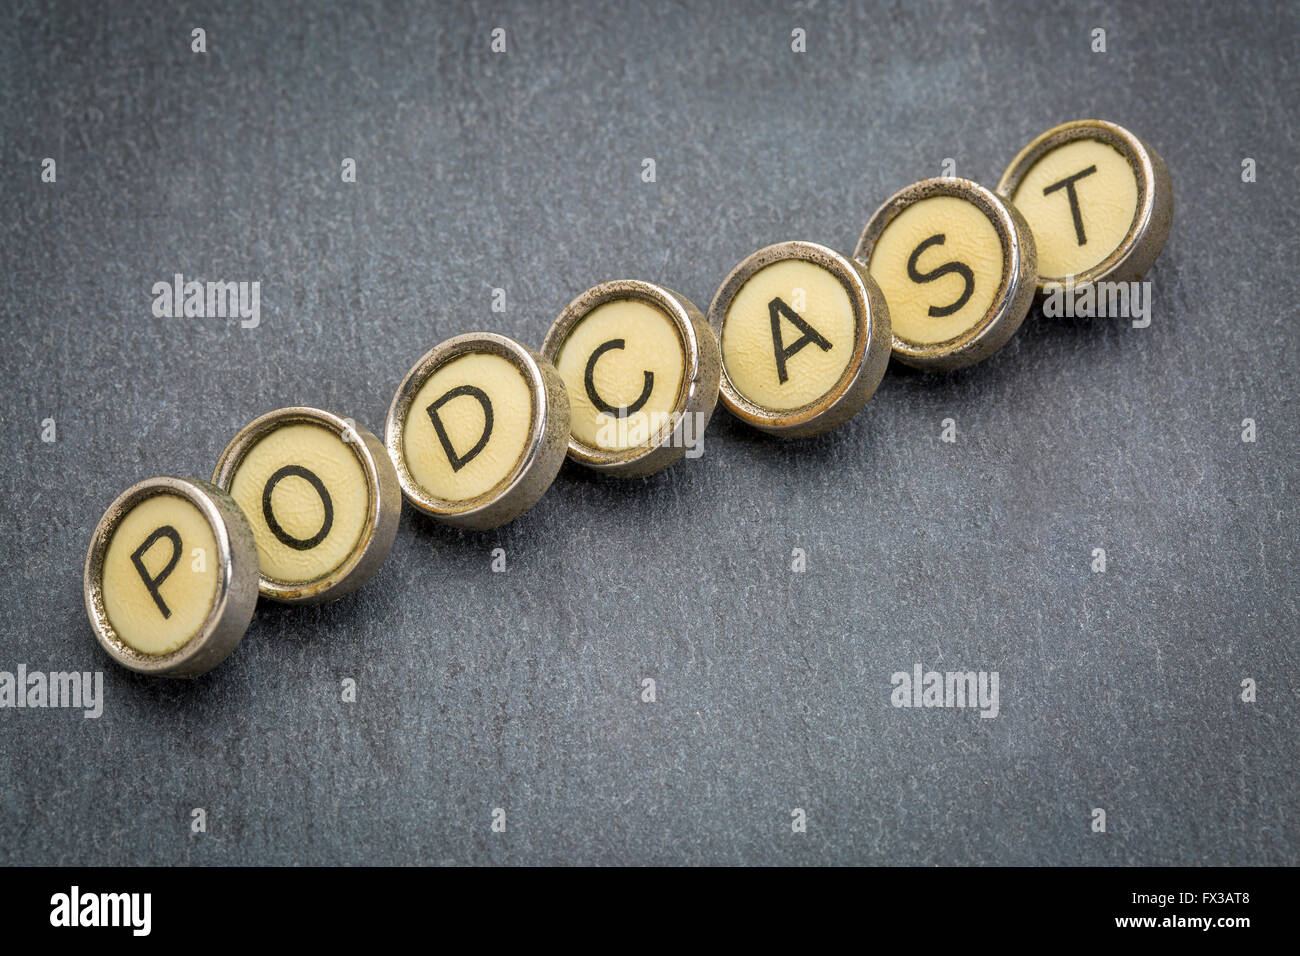 podcast word in old round typewriter keys against gray slate stone Stock Photo